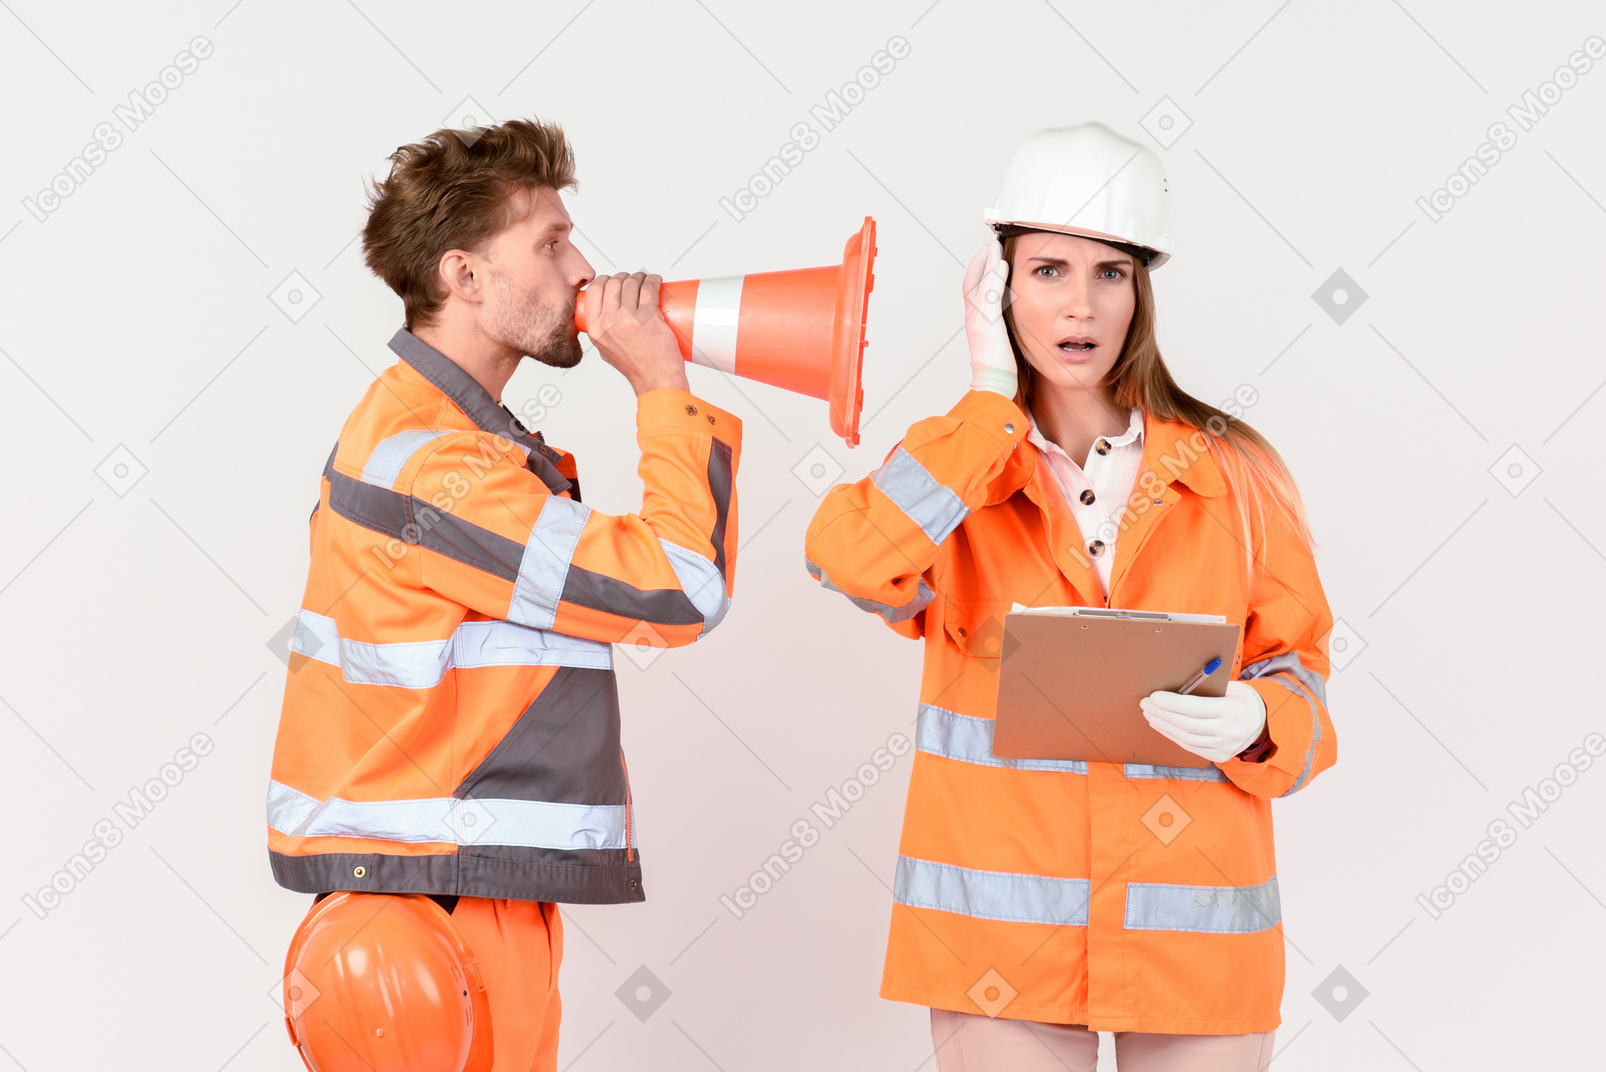 Male street worker shouting in cone to his female colleague